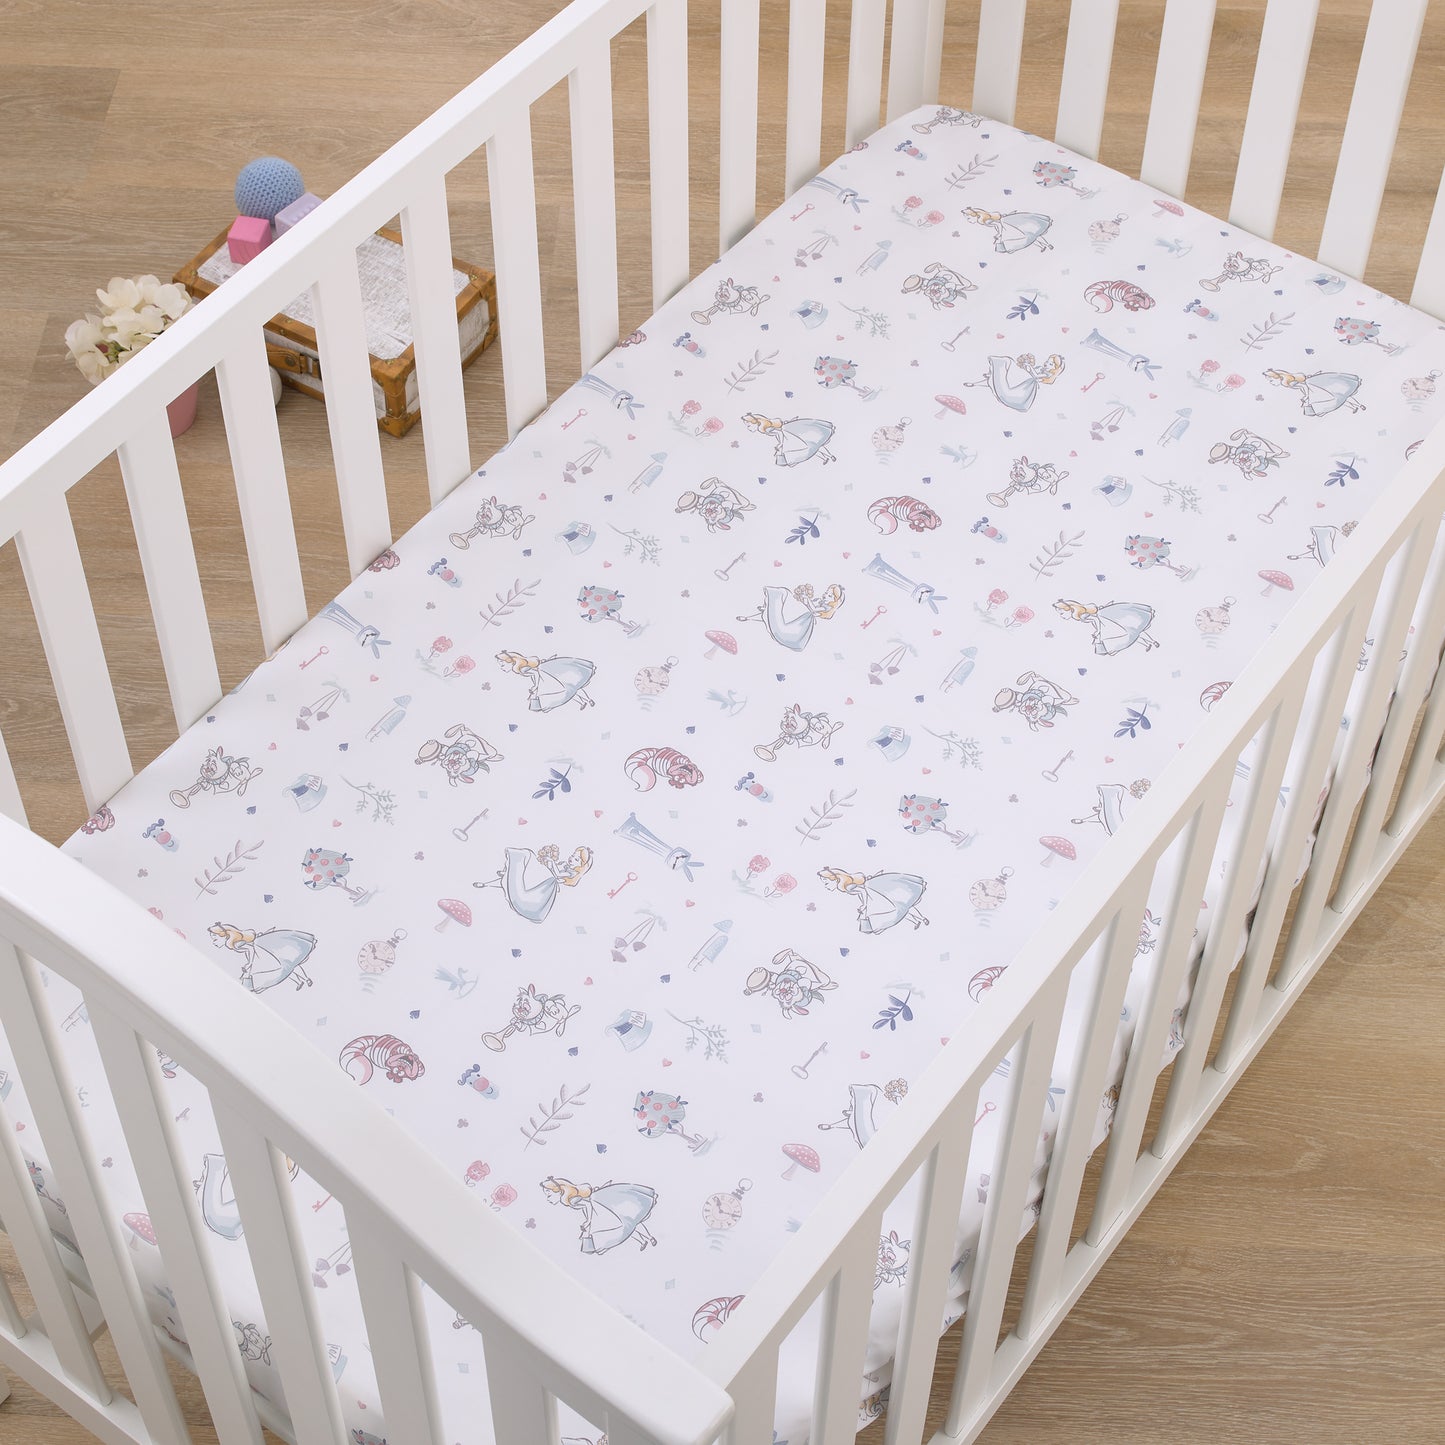 Disney Alice in Wonderland Light Blue, Pink, and White, Rabbit, and Cheshire Cat Super Soft Nursery Fitted Mini Crib Sheet